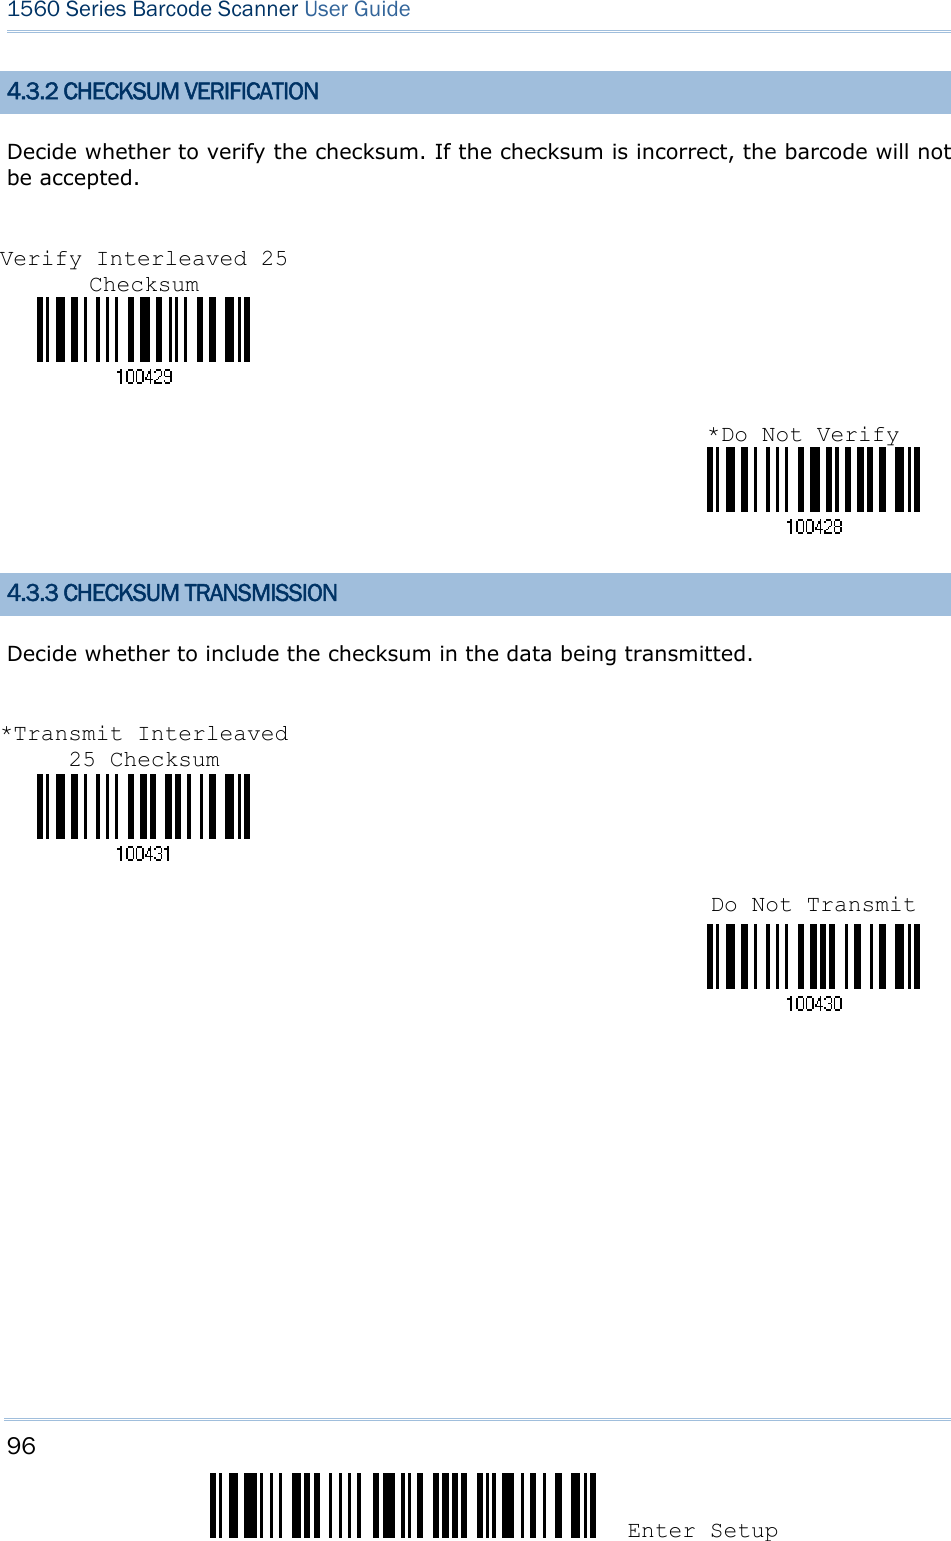 96 Enter Setup 1560 Series Barcode Scanner User Guide  4.3.2 CHECKSUM VERIFICATION Decide whether to verify the checksum. If the checksum is incorrect, the barcode will not be accepted.     4.3.3 CHECKSUM TRANSMISSION Decide whether to include the checksum in the data being transmitted.           Verify Interleaved 25 Checksum *Transmit Interleaved 25 Checksum Do Not Transmit *Do Not Verify